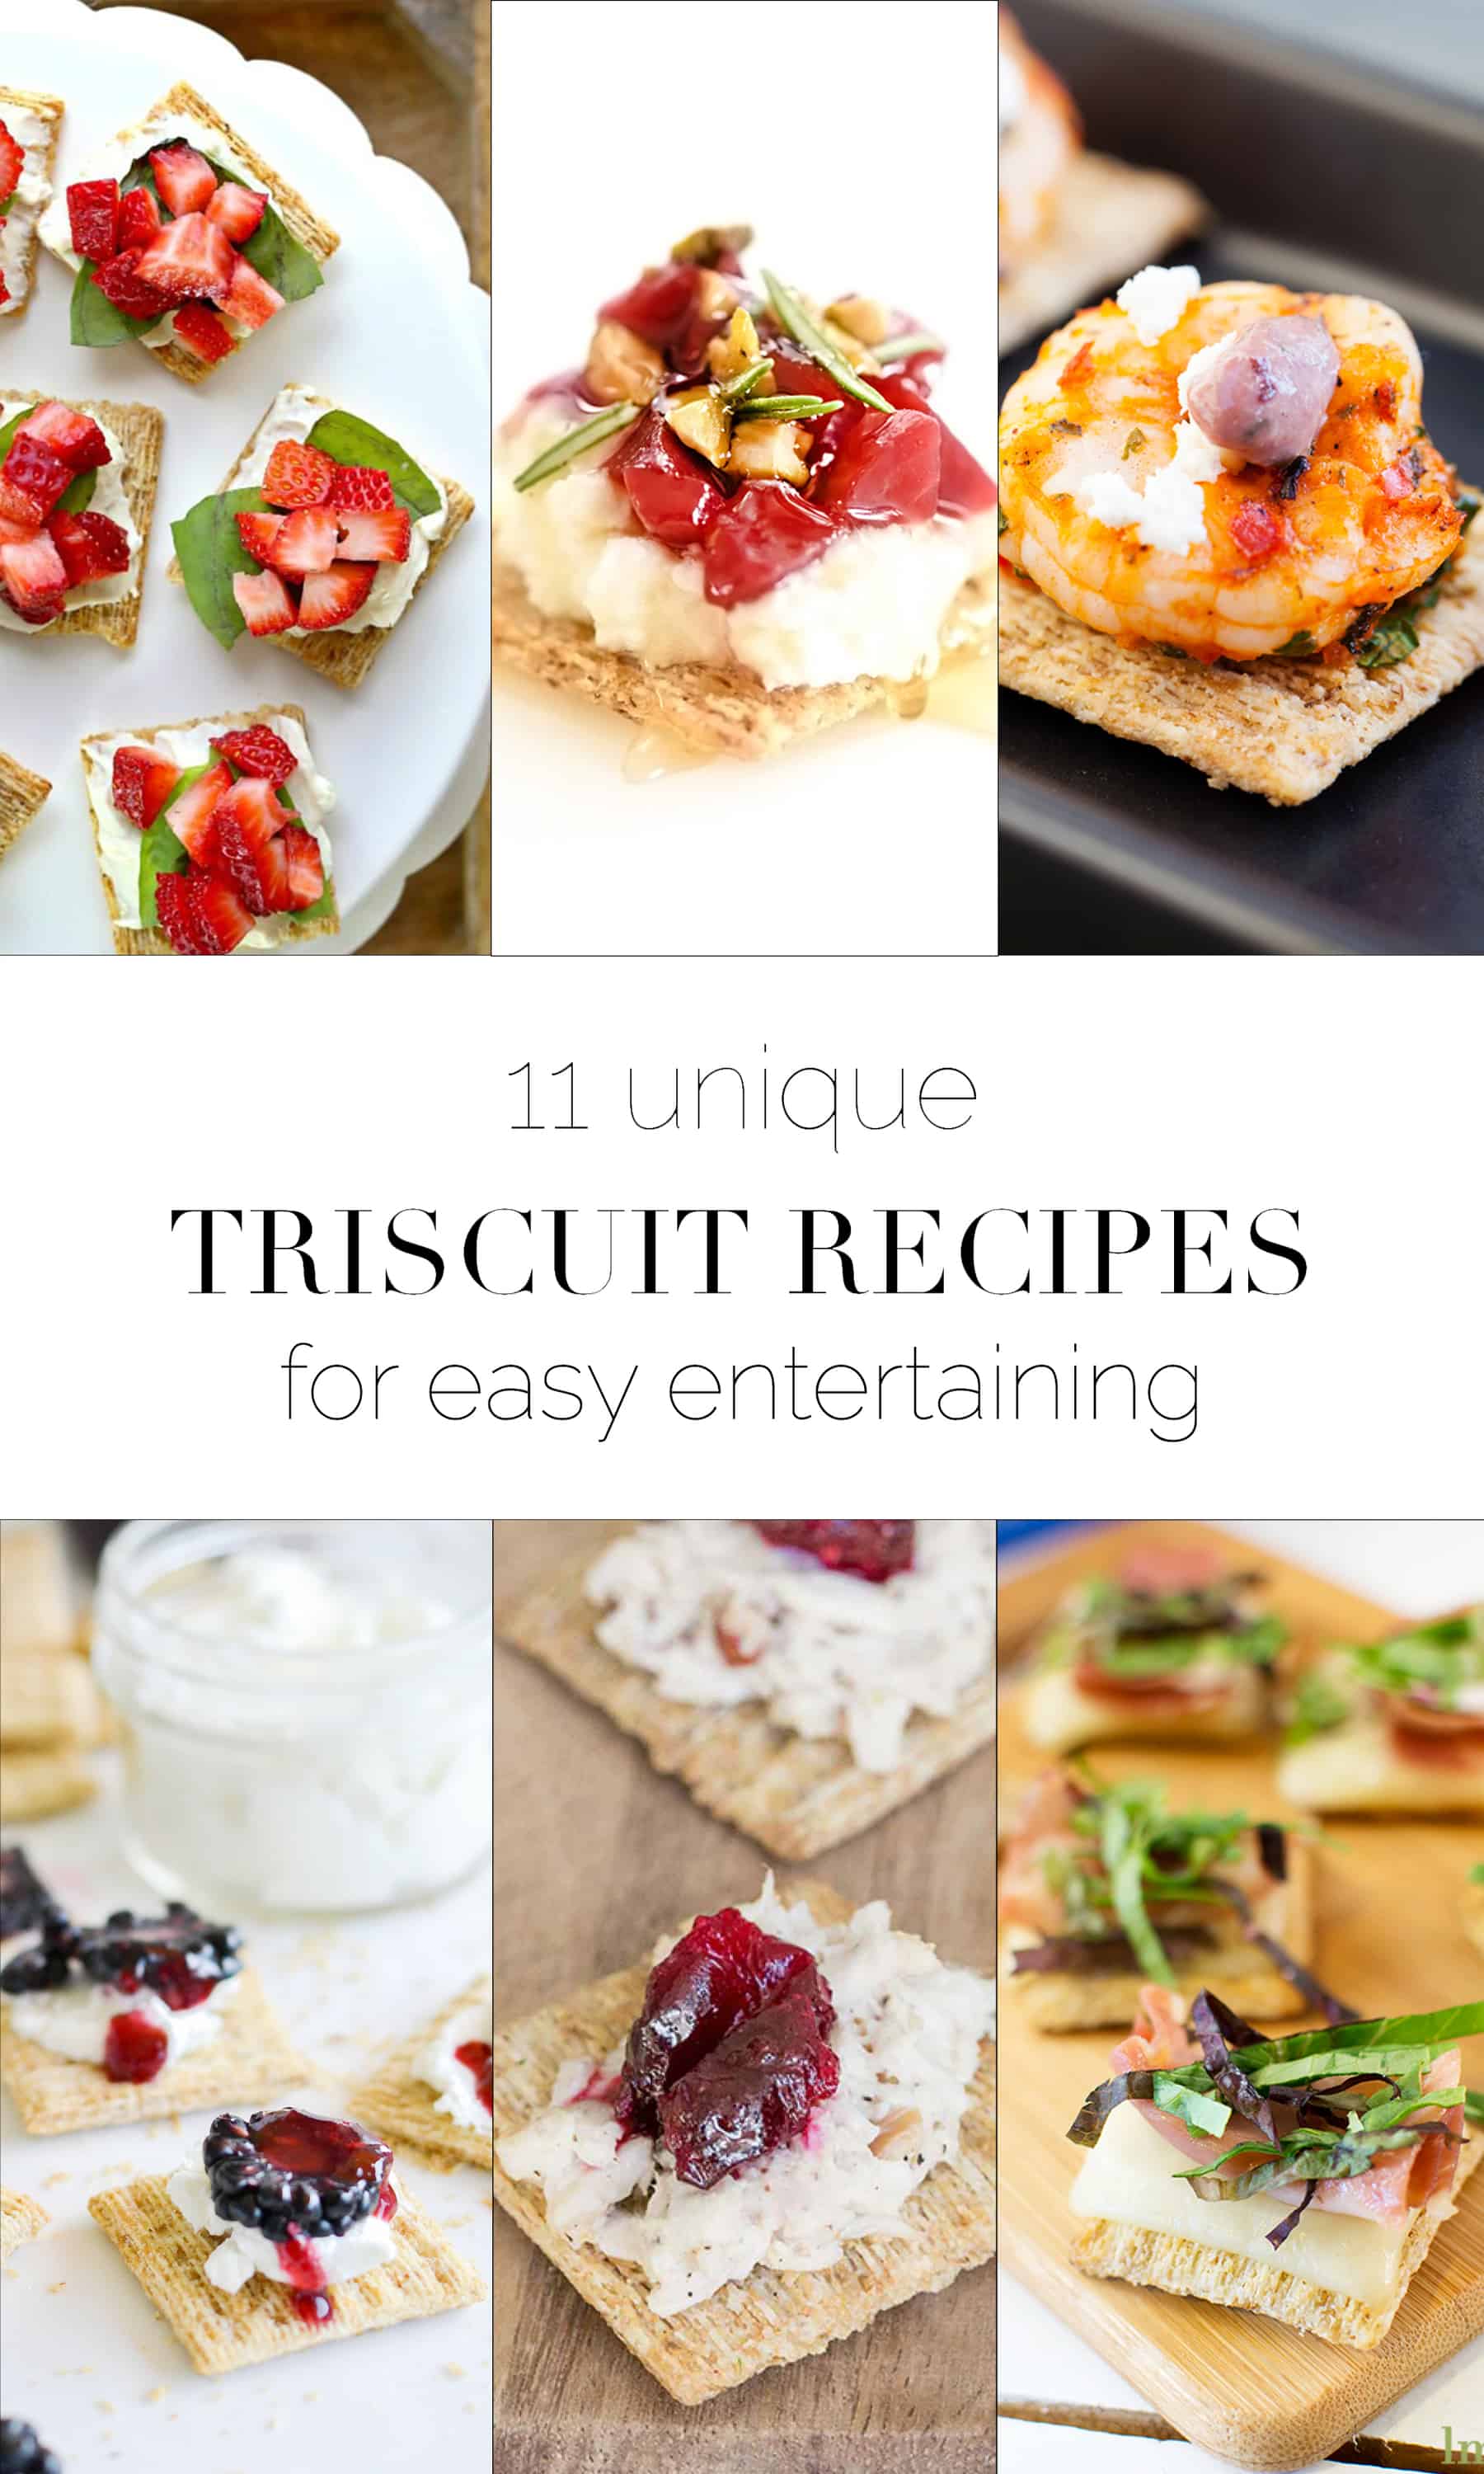 Triscuit Recipes for Entertaining